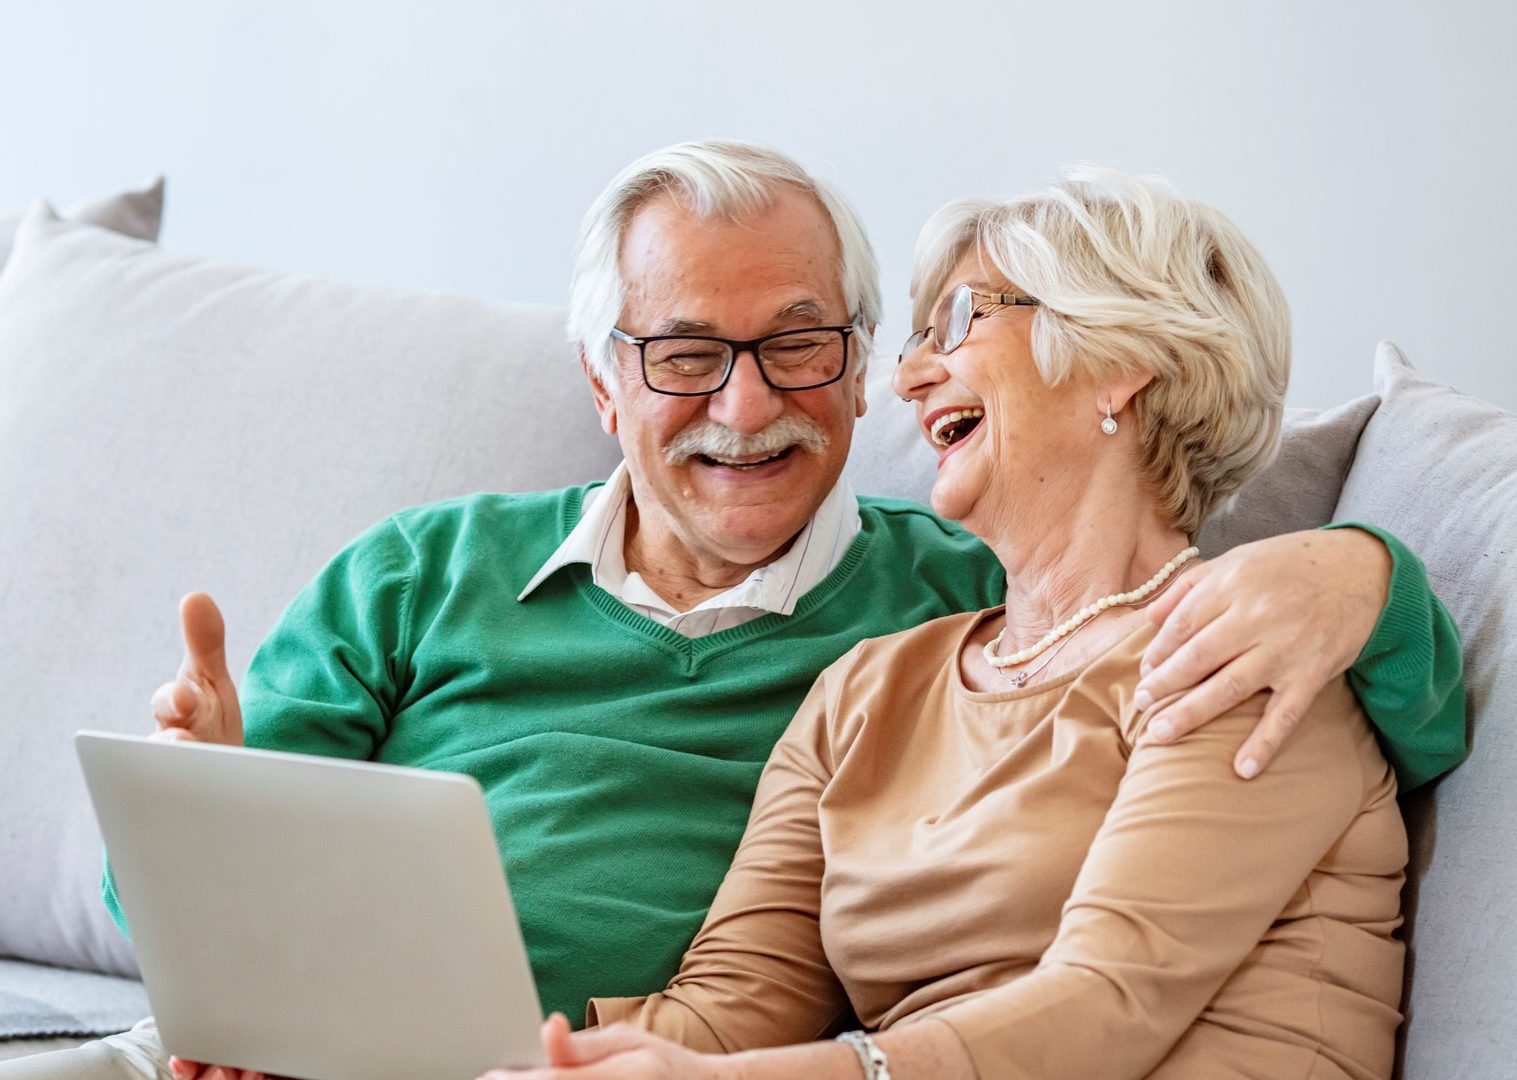 Senior couple laughing on couch